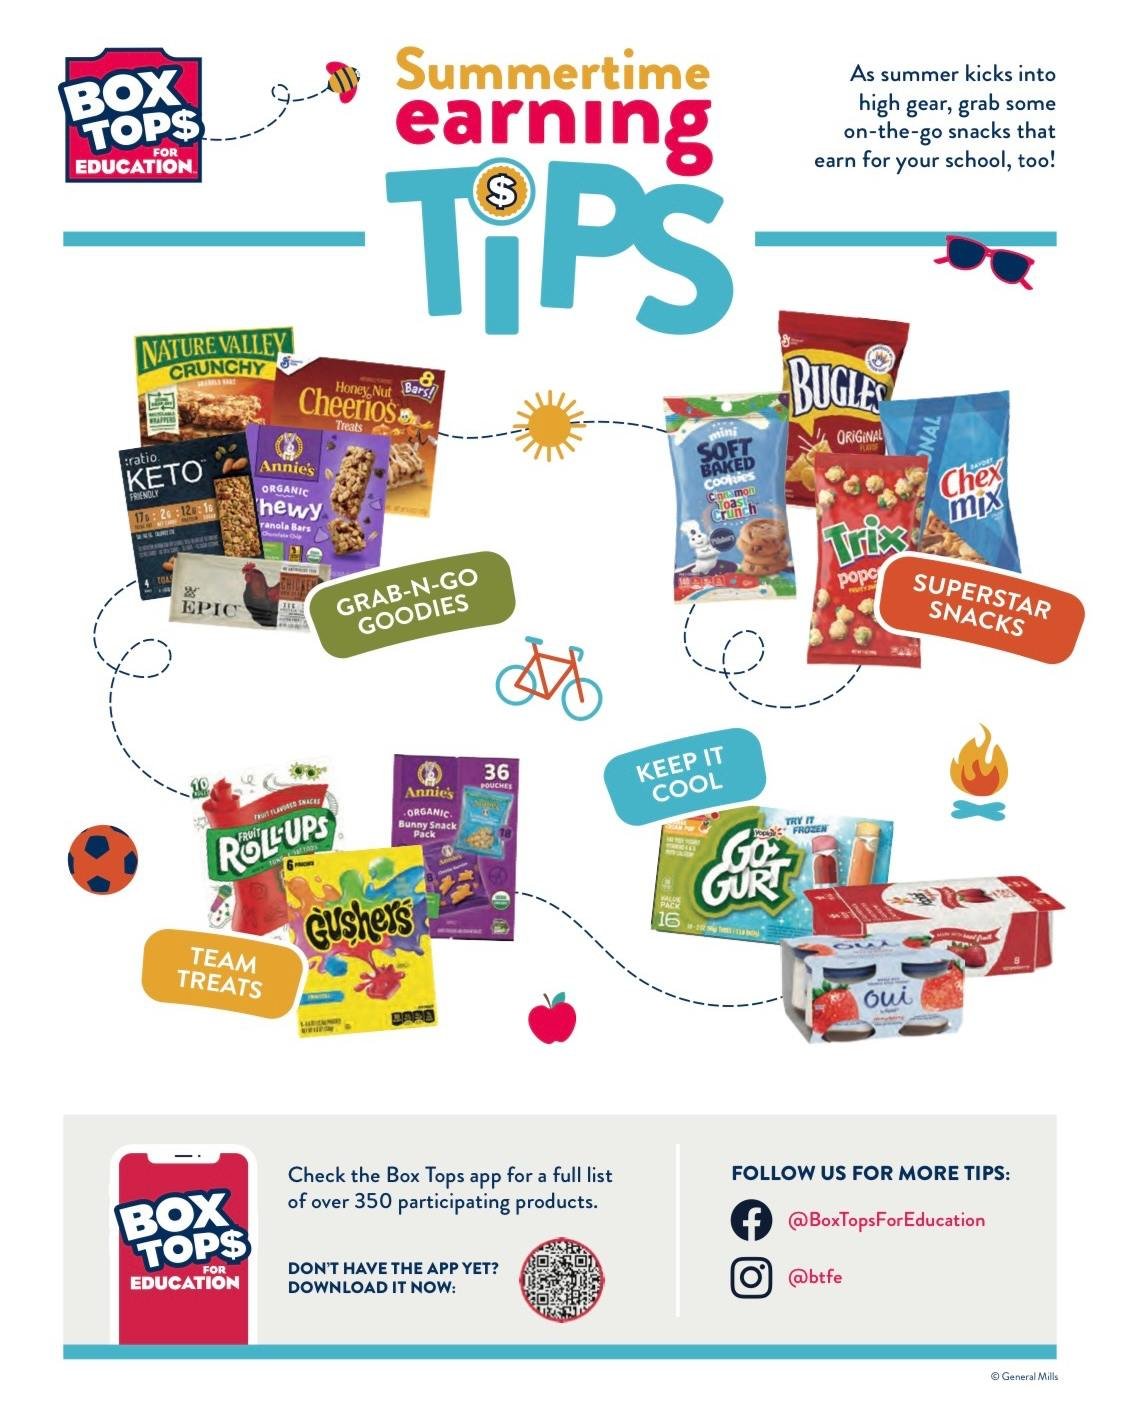 Did you know that we still have our Box Tops for Education program running? It's a really easy way to fundraise for our school! When you buy items with the Box Tops logo, just scan your receipt into their app to earn credit!